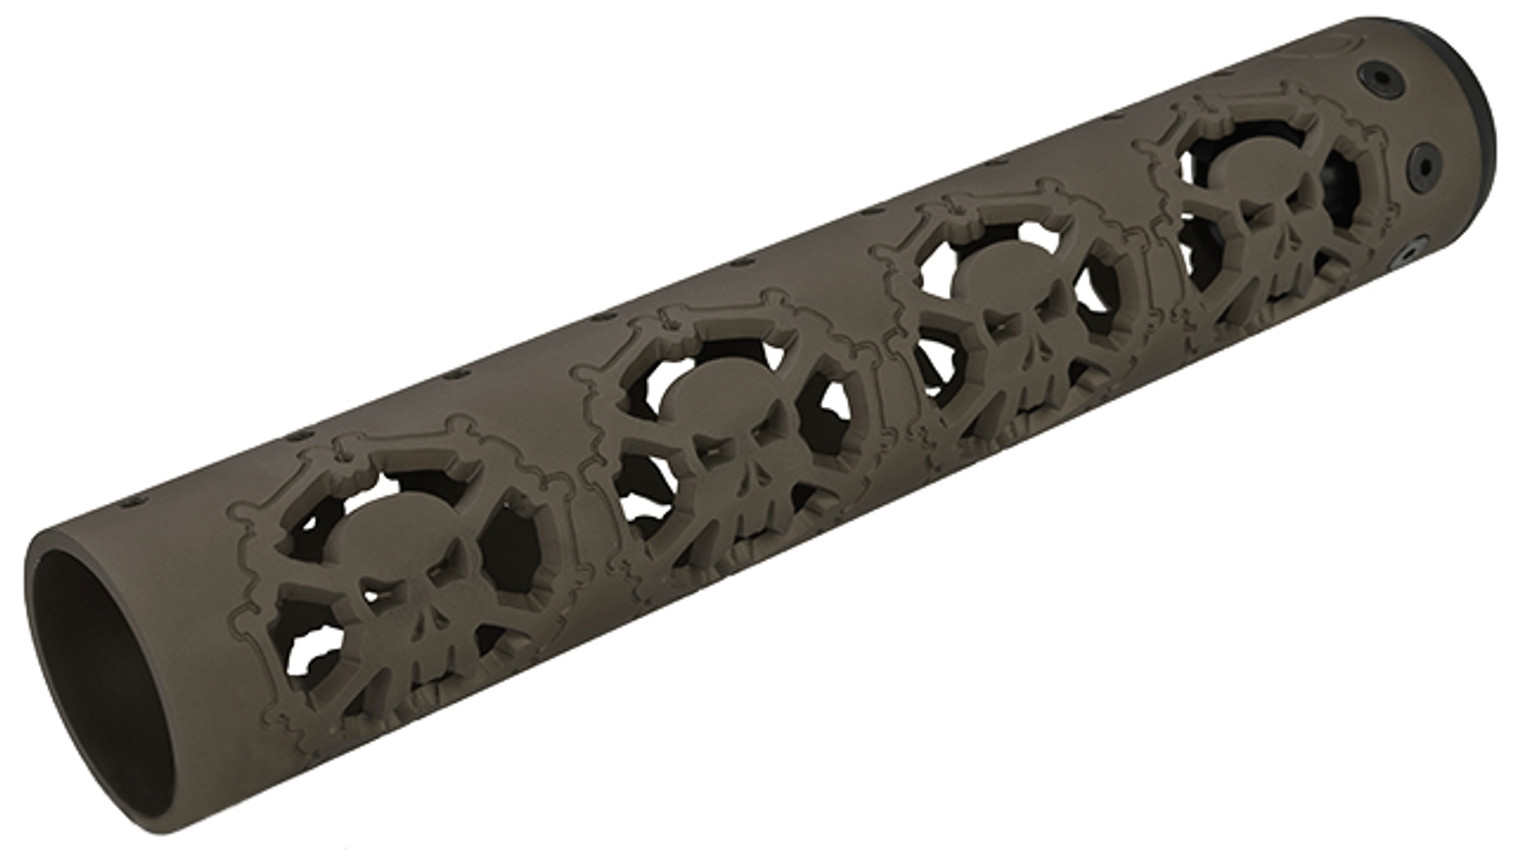 Unique ARs CNC Machined "Skulls" Handguard for AR15 Pattern Rifles (Color: Flat Dark Earth / 12" / Rail Only)